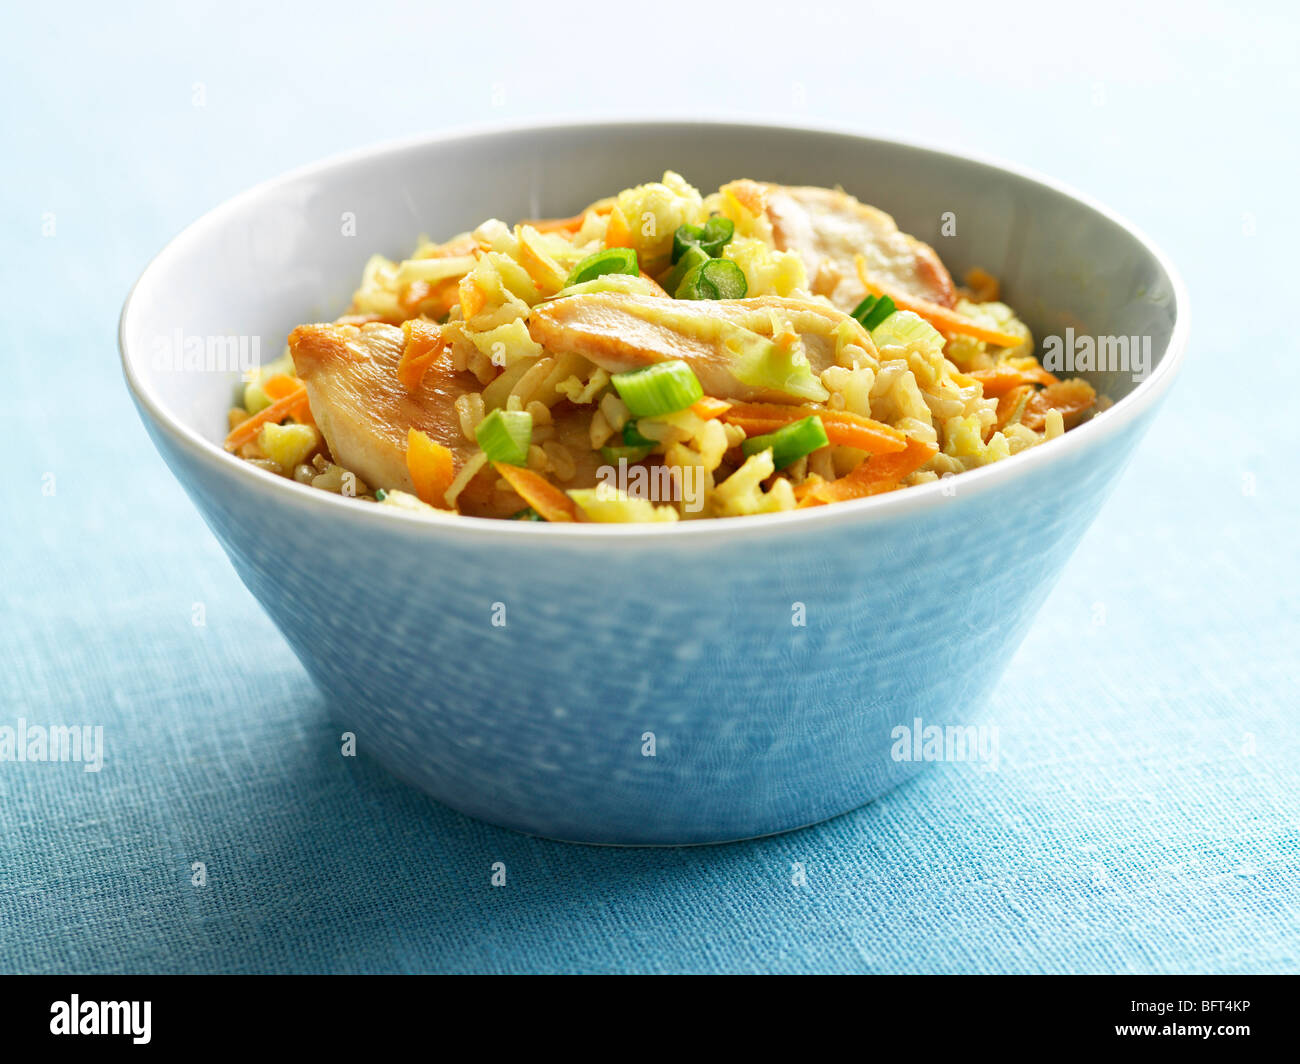 Fried Rice with Chicken, Green Onions and Orange Peppers in Bowl Stock Photo